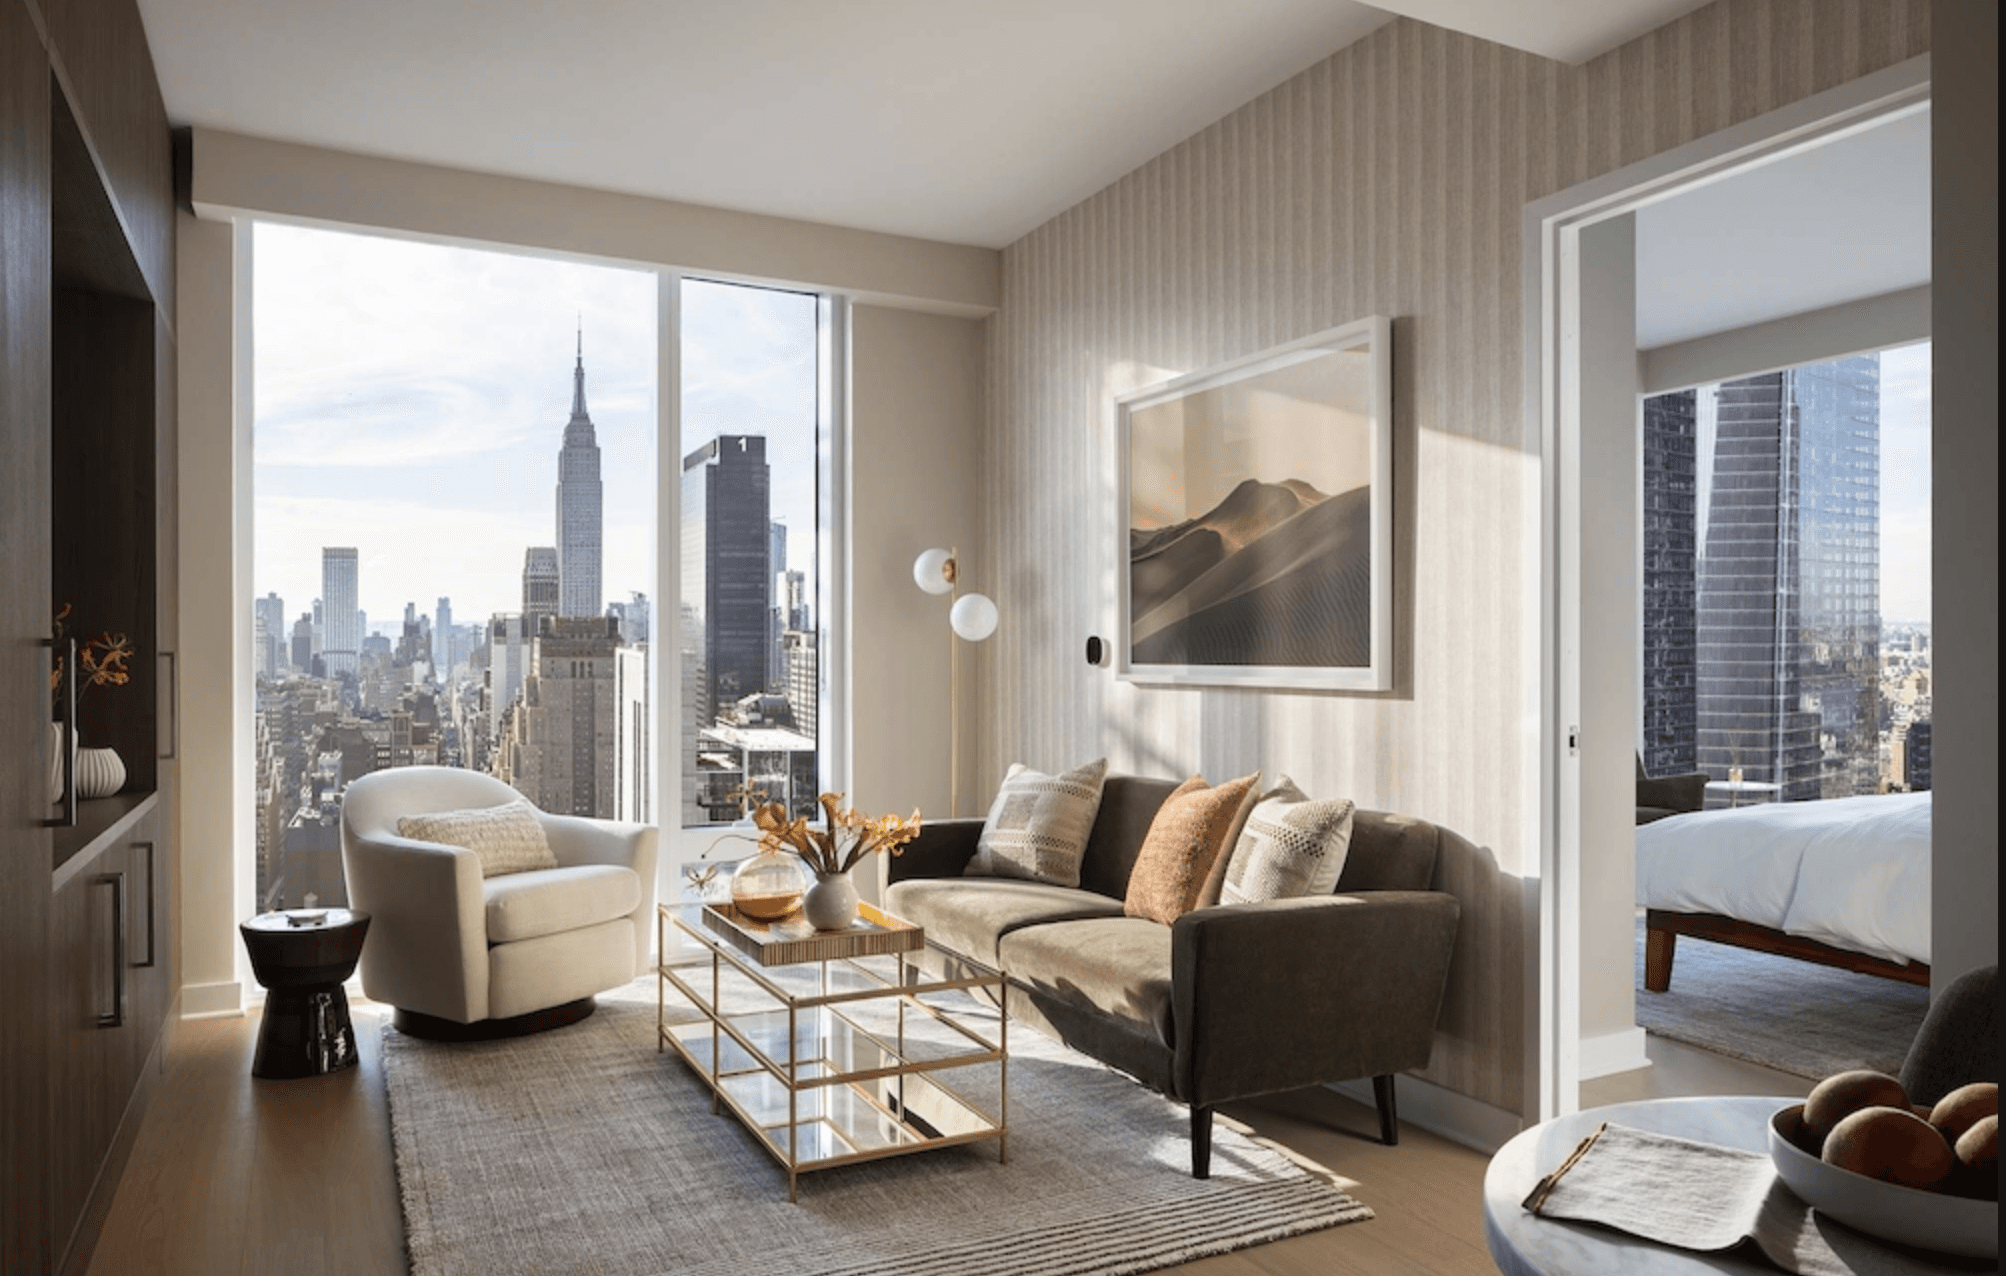 Luxury 1BR Apt with Hotel Style Service & Amenities in Hudson Yards